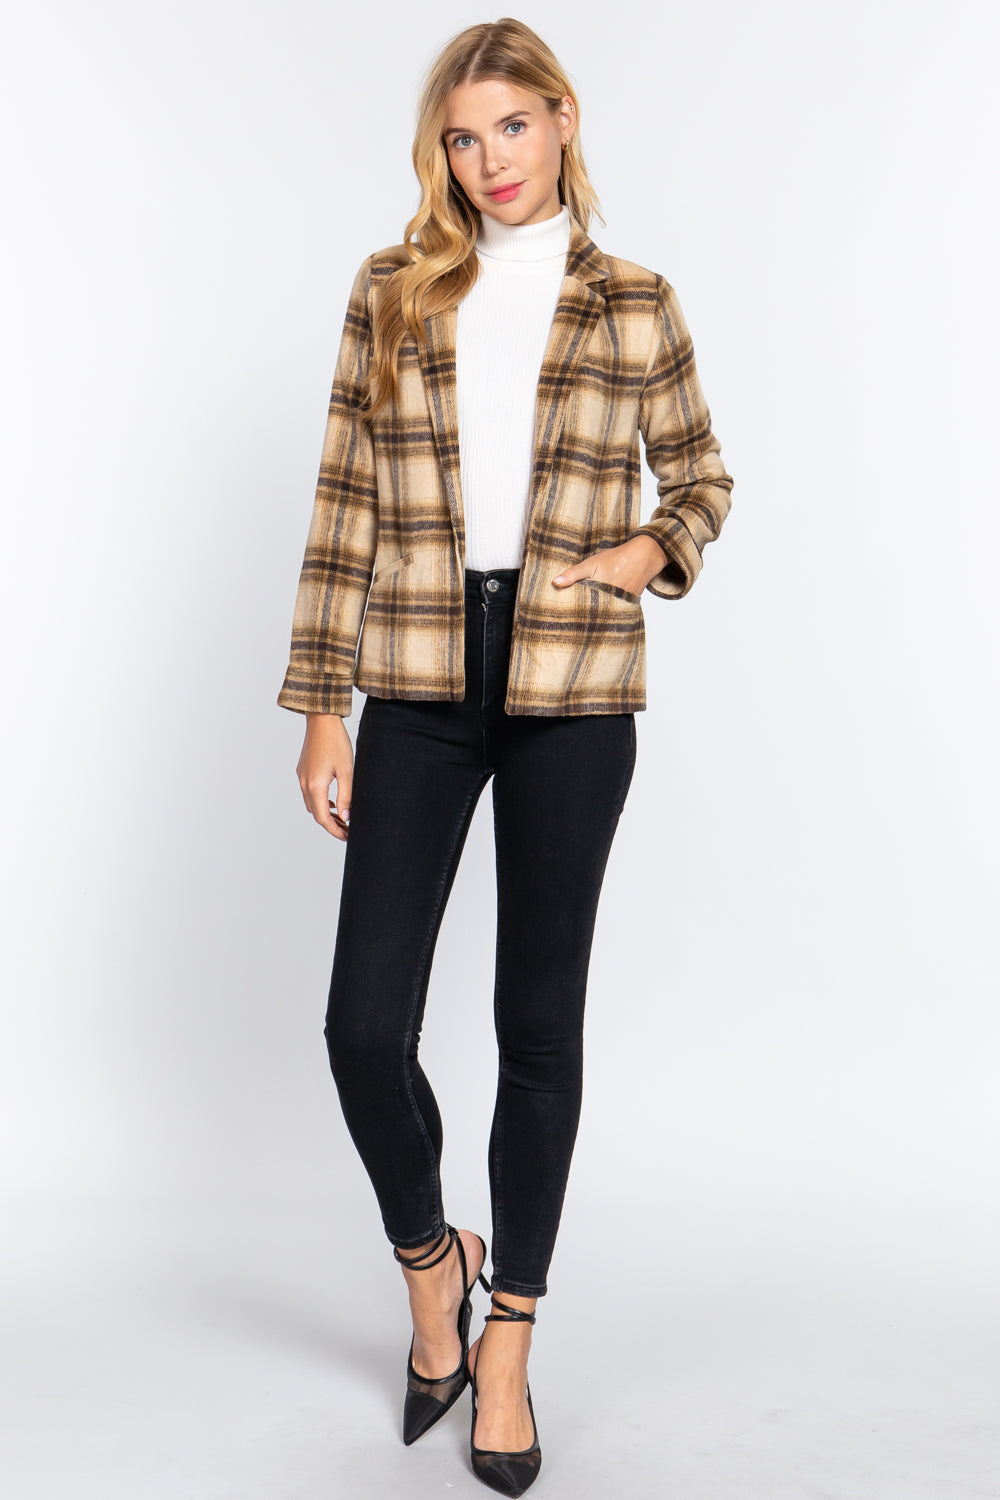 Taupe Brown - Notched Collar Plaid Jacket - 2 colors - womens blazer at TFC&H Co.